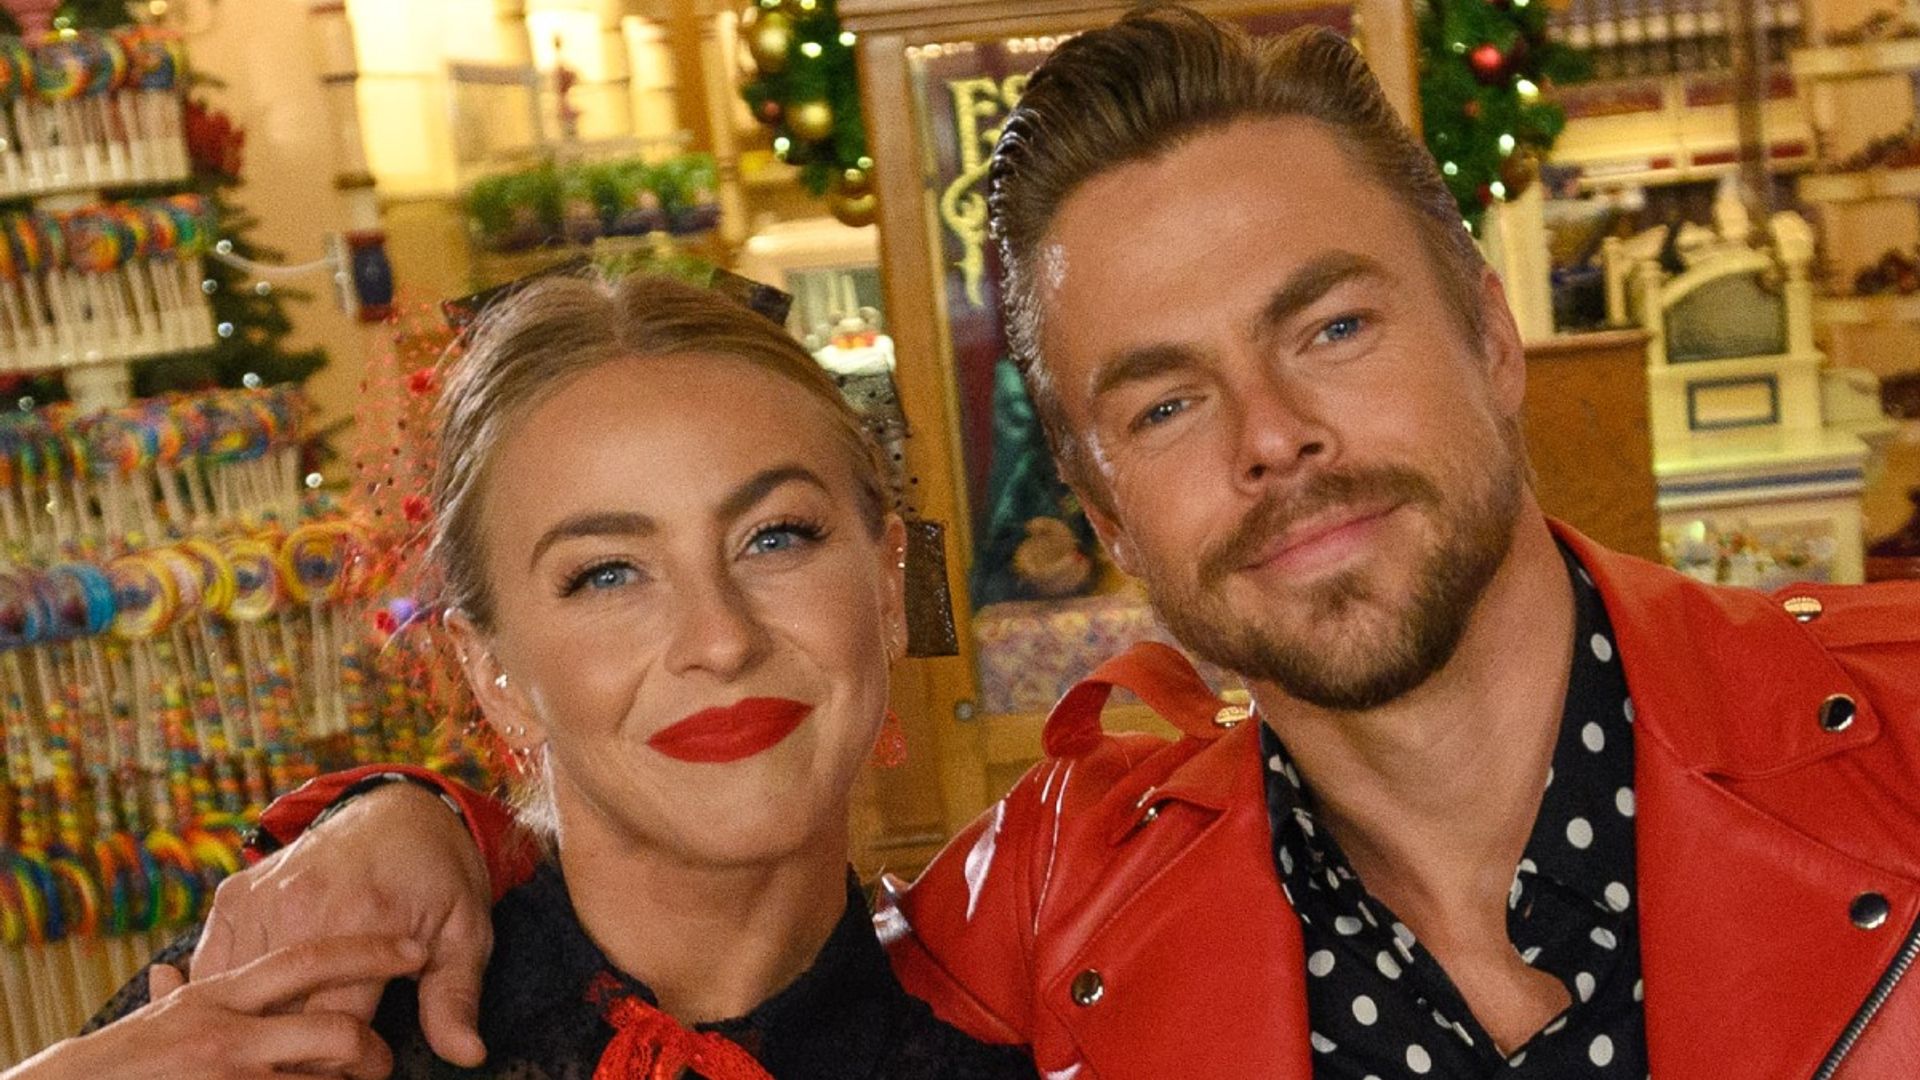 Julianne Hough returns to Dancing with the Stars in the wake of brother Derek's health troubles